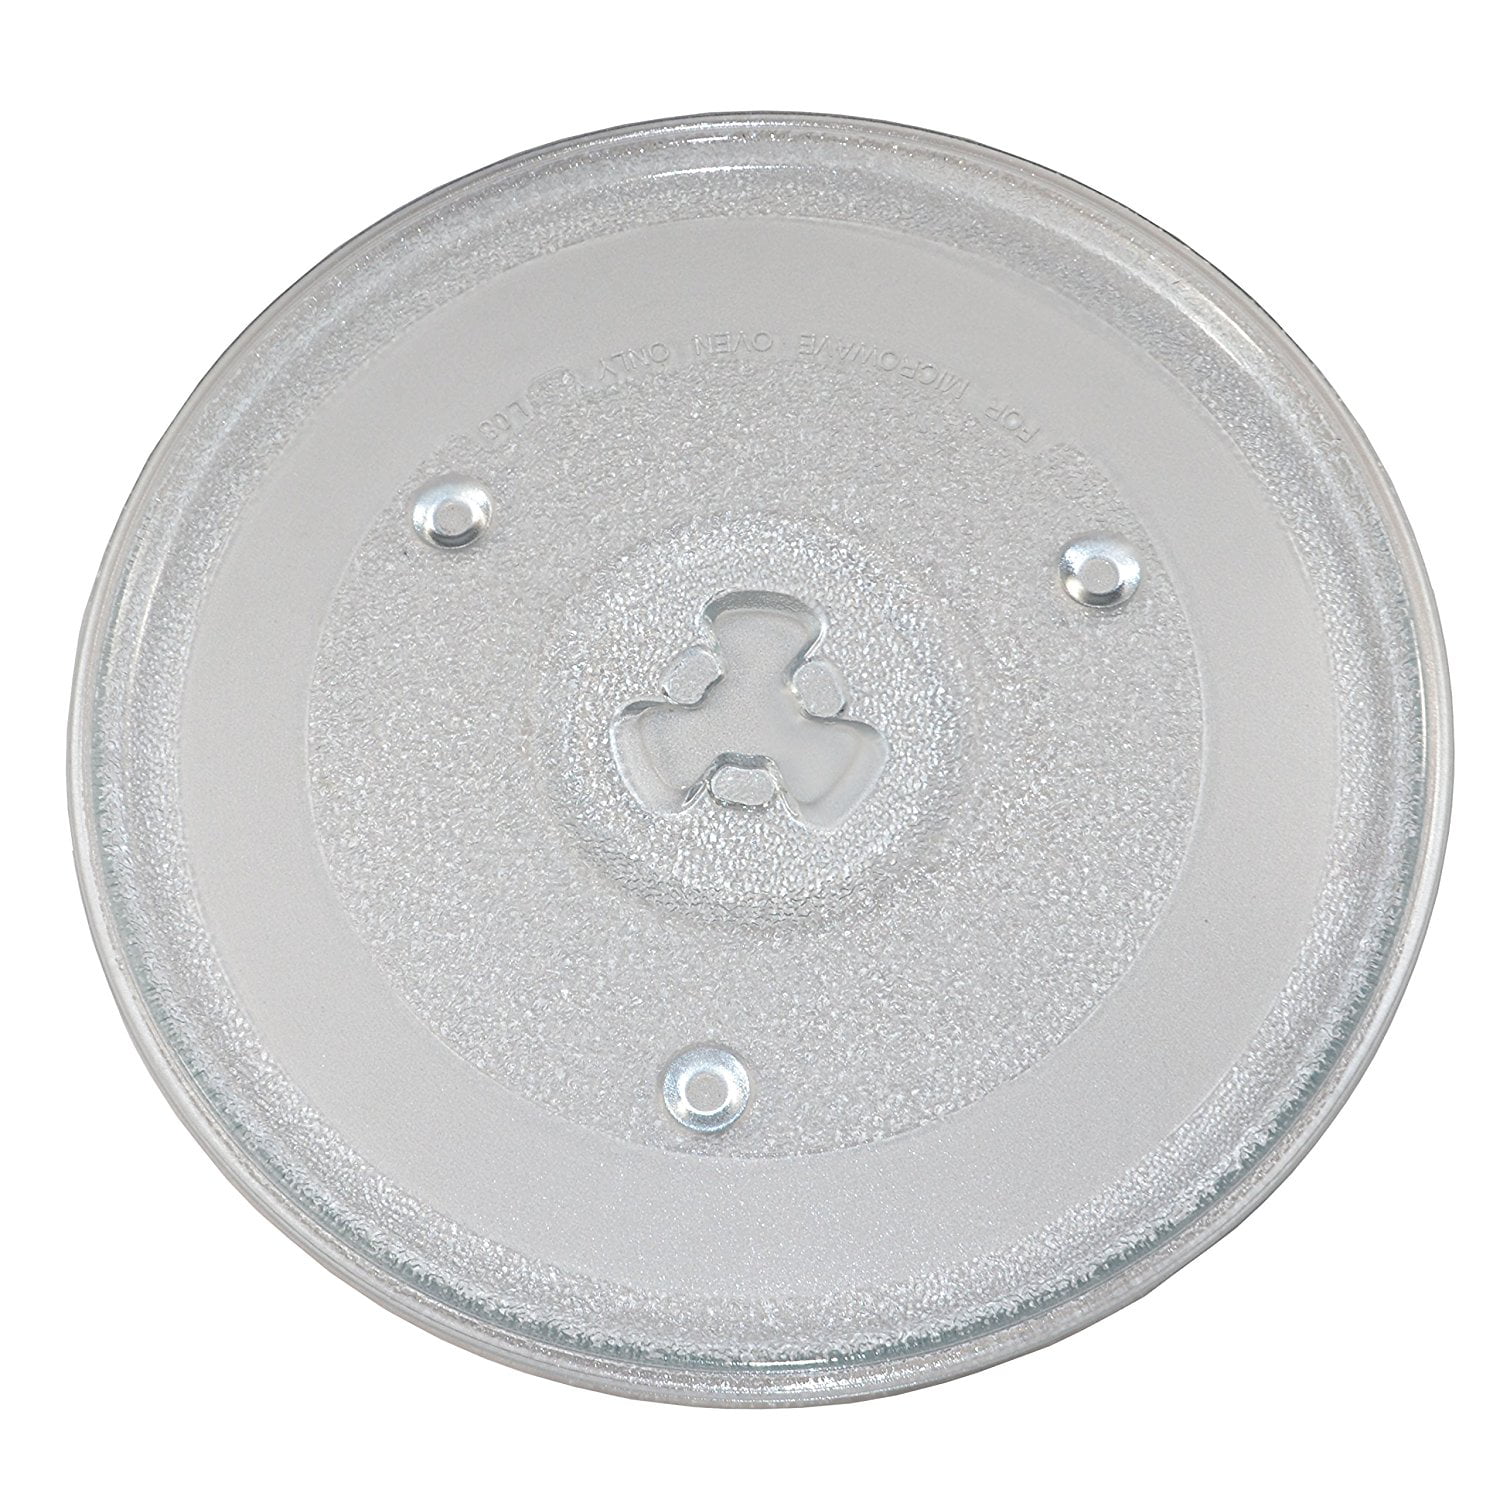 10 1/2" Oster Microwave Replacement Plate P23